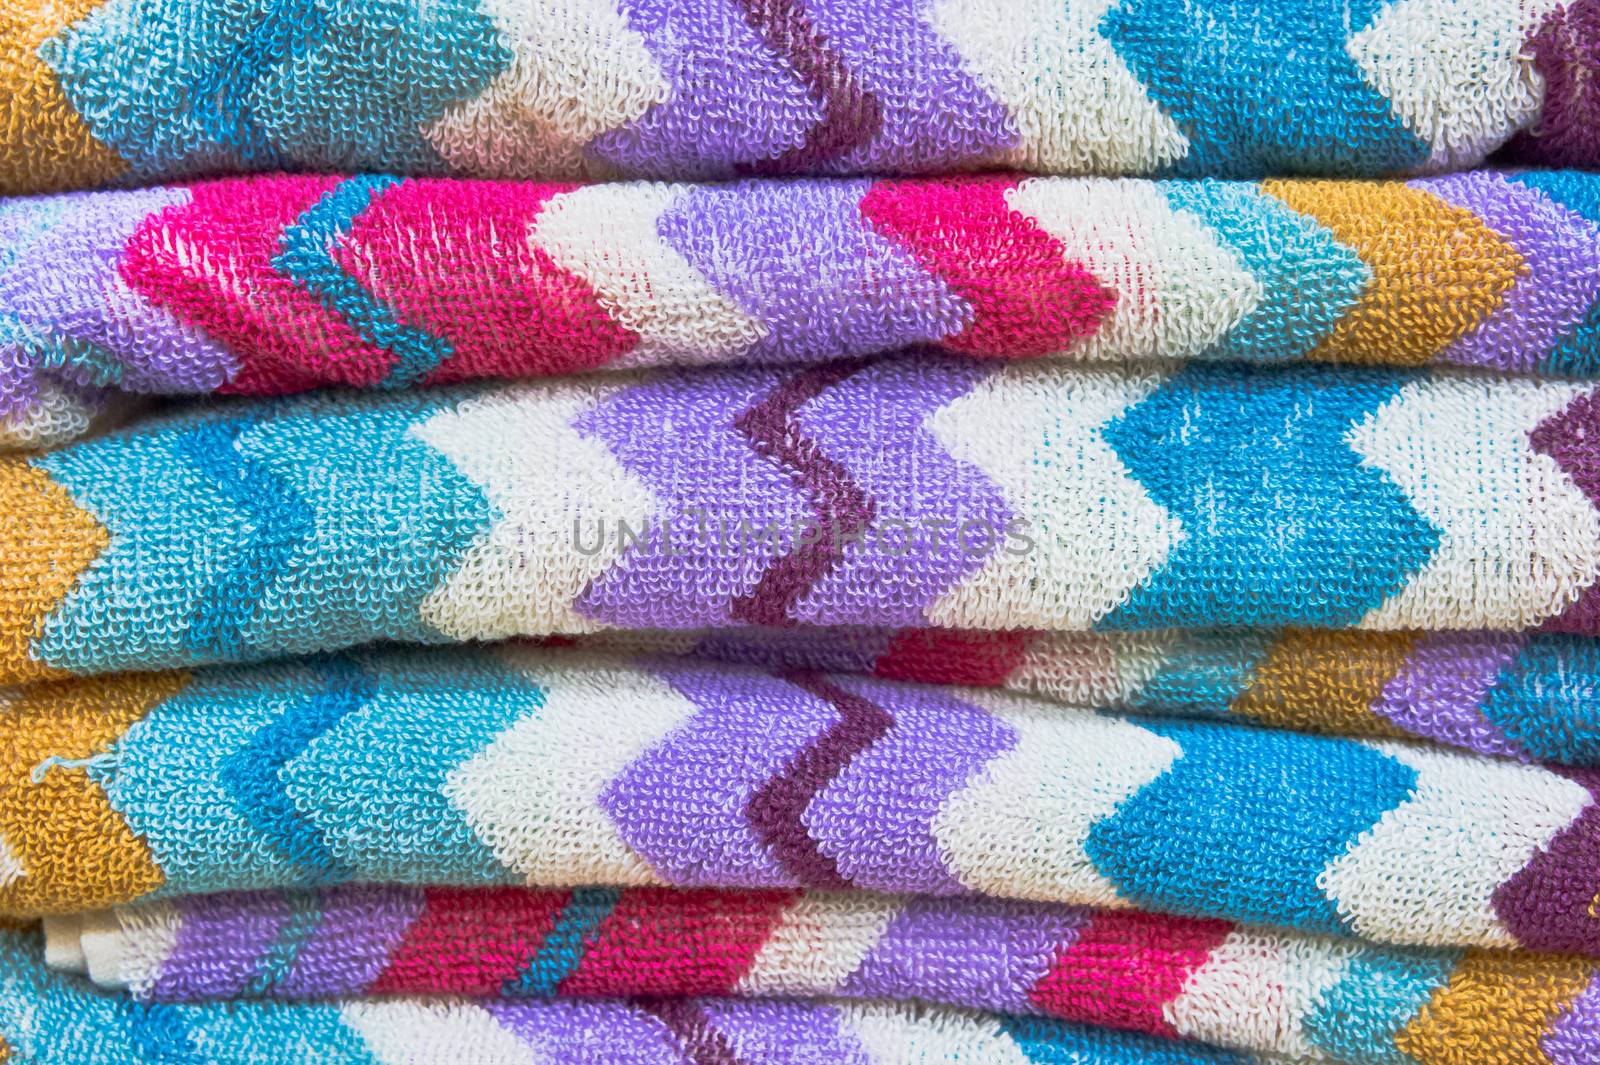 Colorful towels by trgowanlock